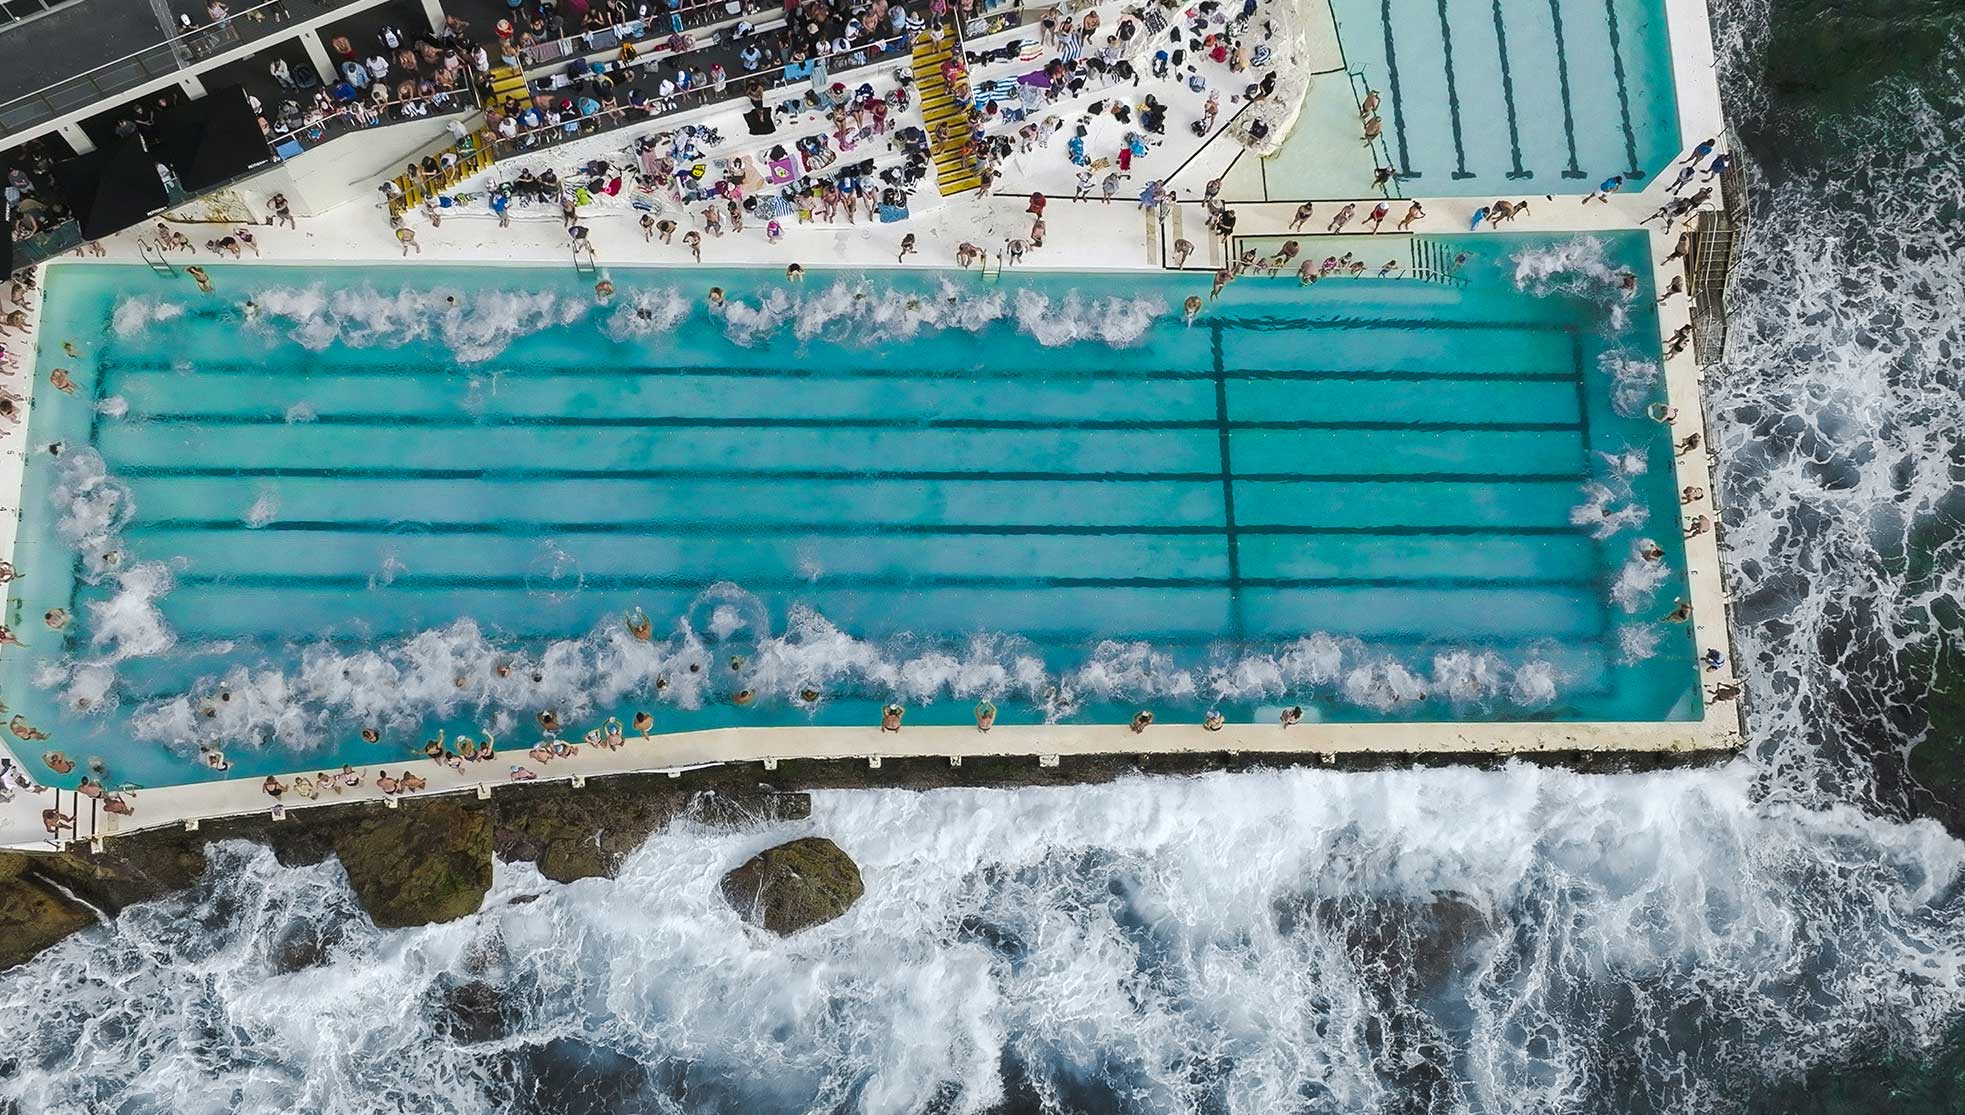 Drone shot from above showing swimmers all jumping into the Bondi Icebergs pool together